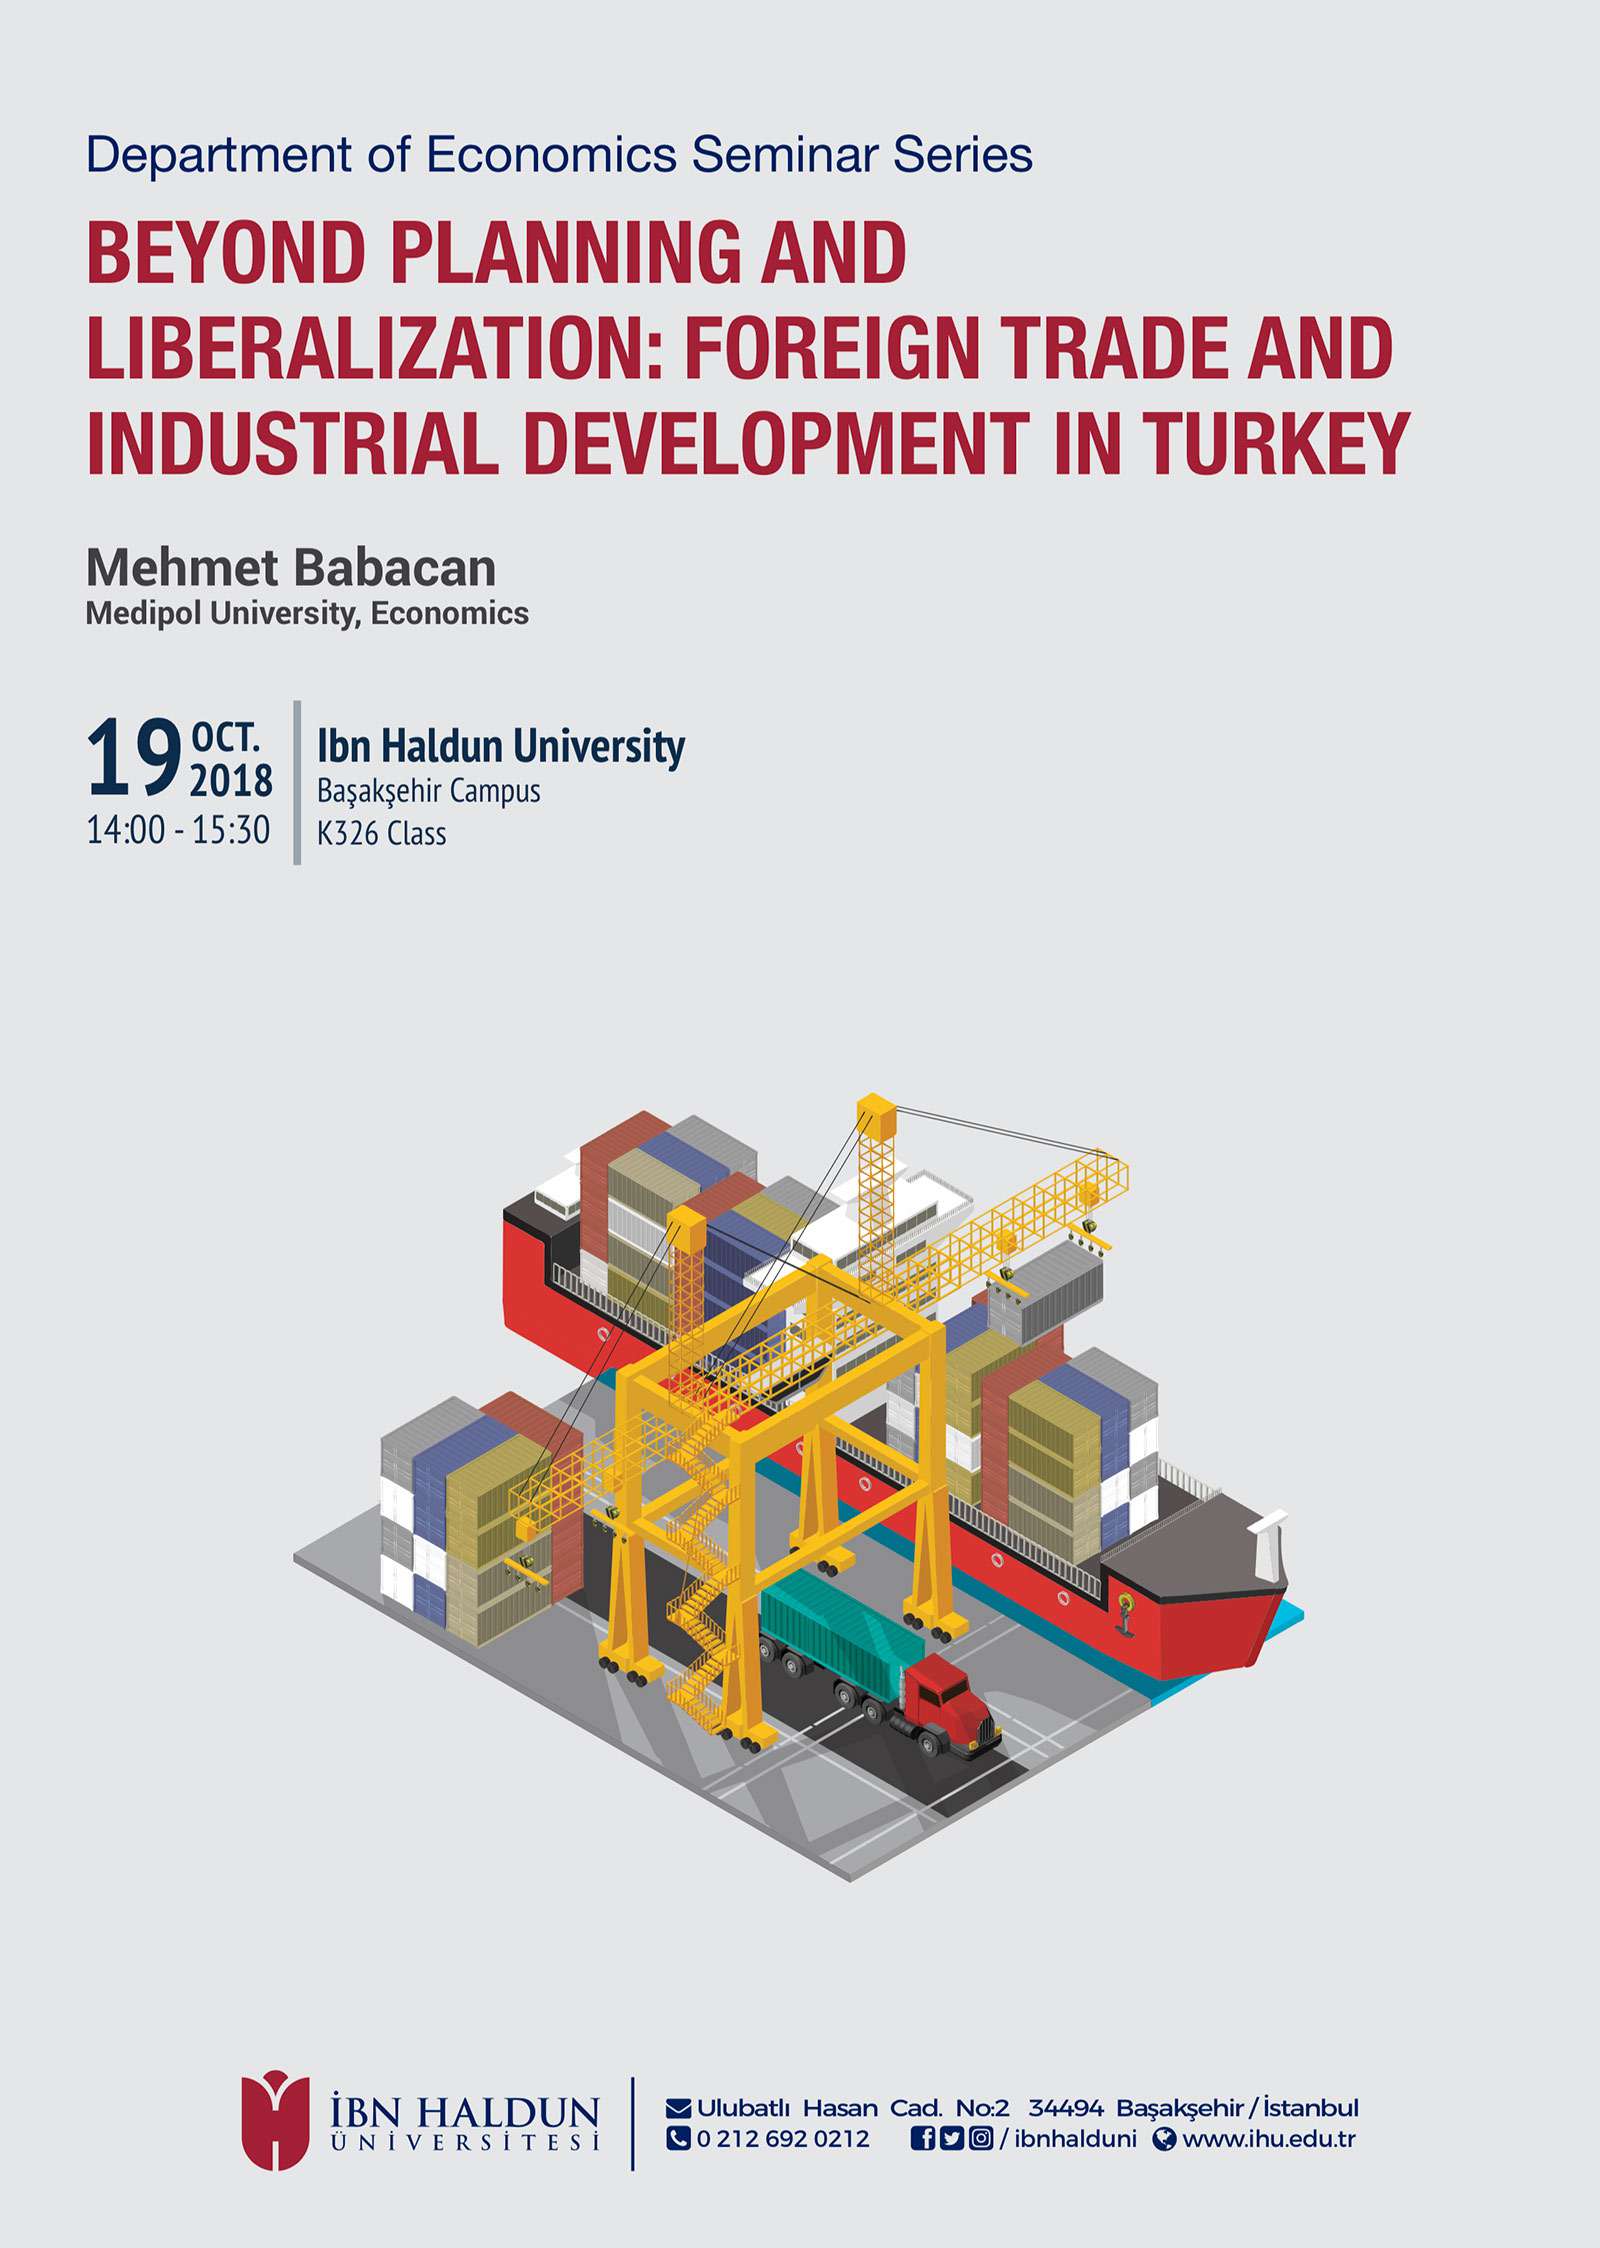 Beyond Planning and Liberalization: Foreign Trade and Industrial Development in Turkey